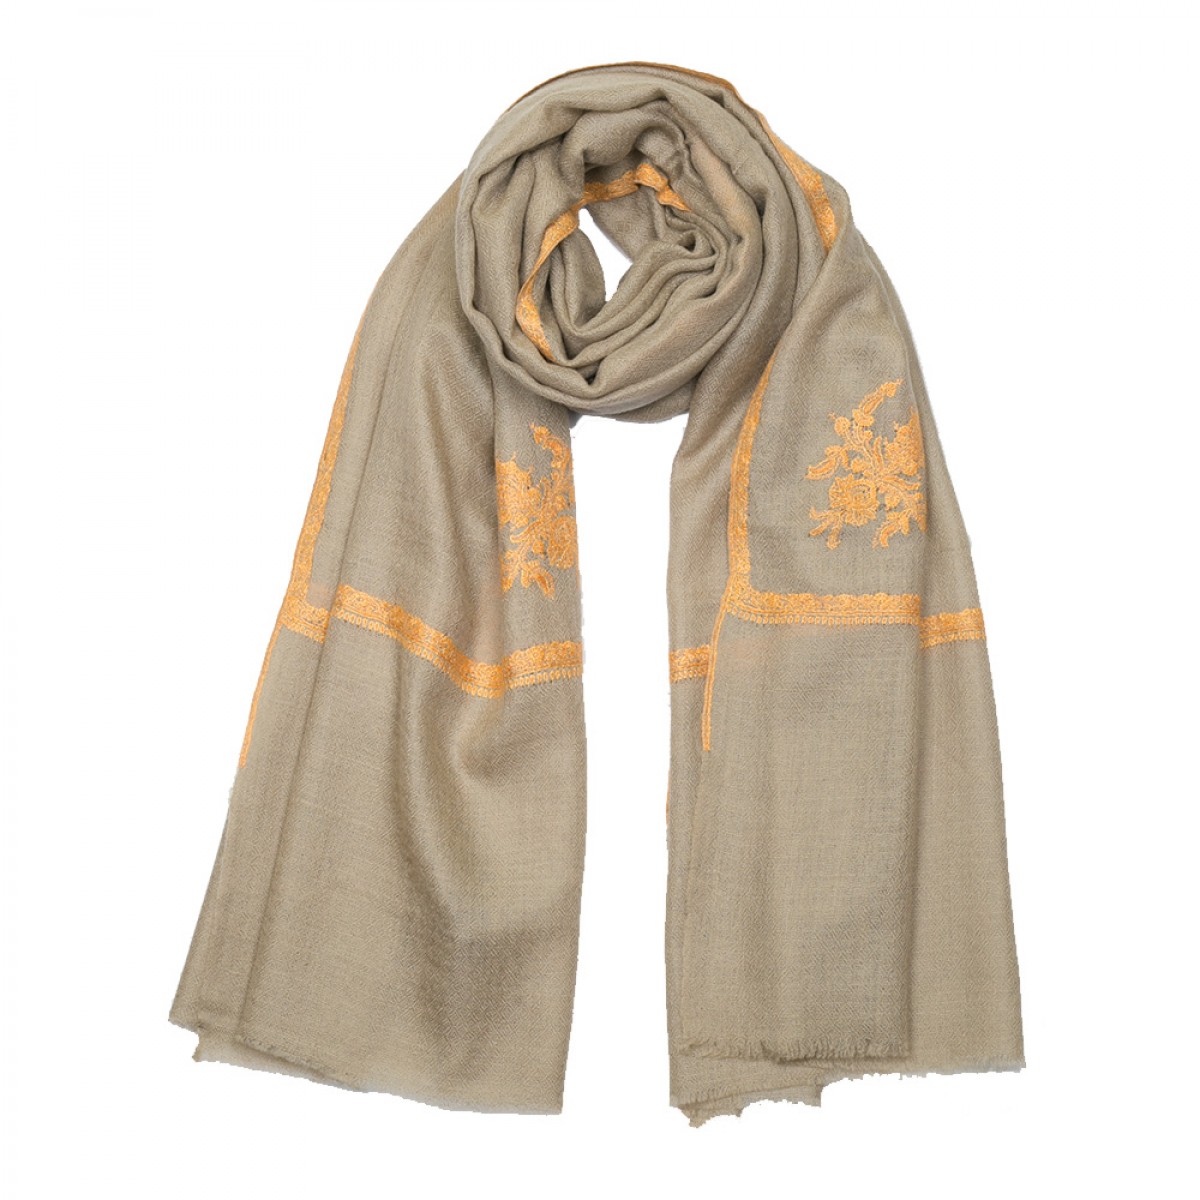 Embroidered Pashmina stole - Natural & Yellow